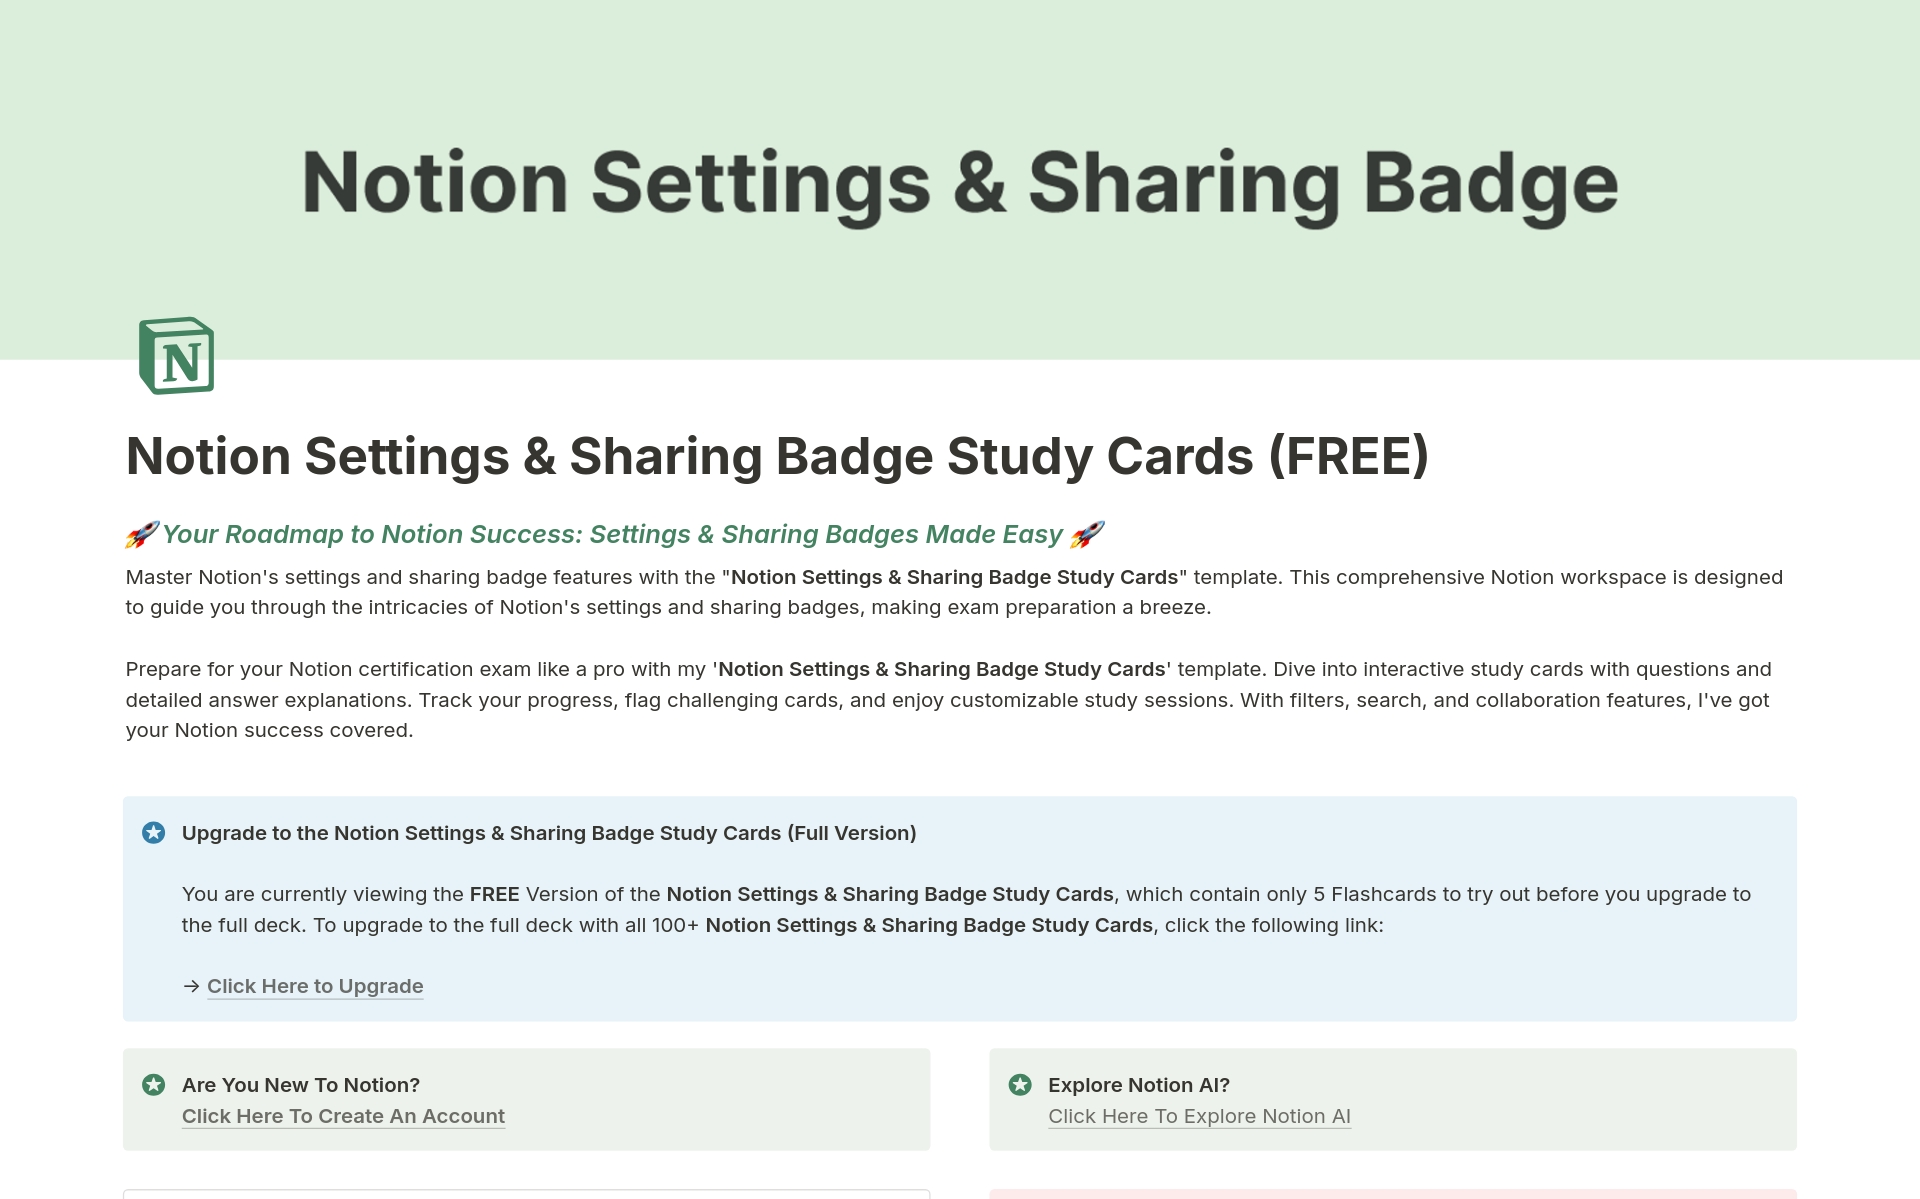 Notion Settings & Sharing Badge Study Cards

🚀 Earn Your Notion Settings & Sharing Badge with Confidence: Your Path to Mastery Starts Here 🚀